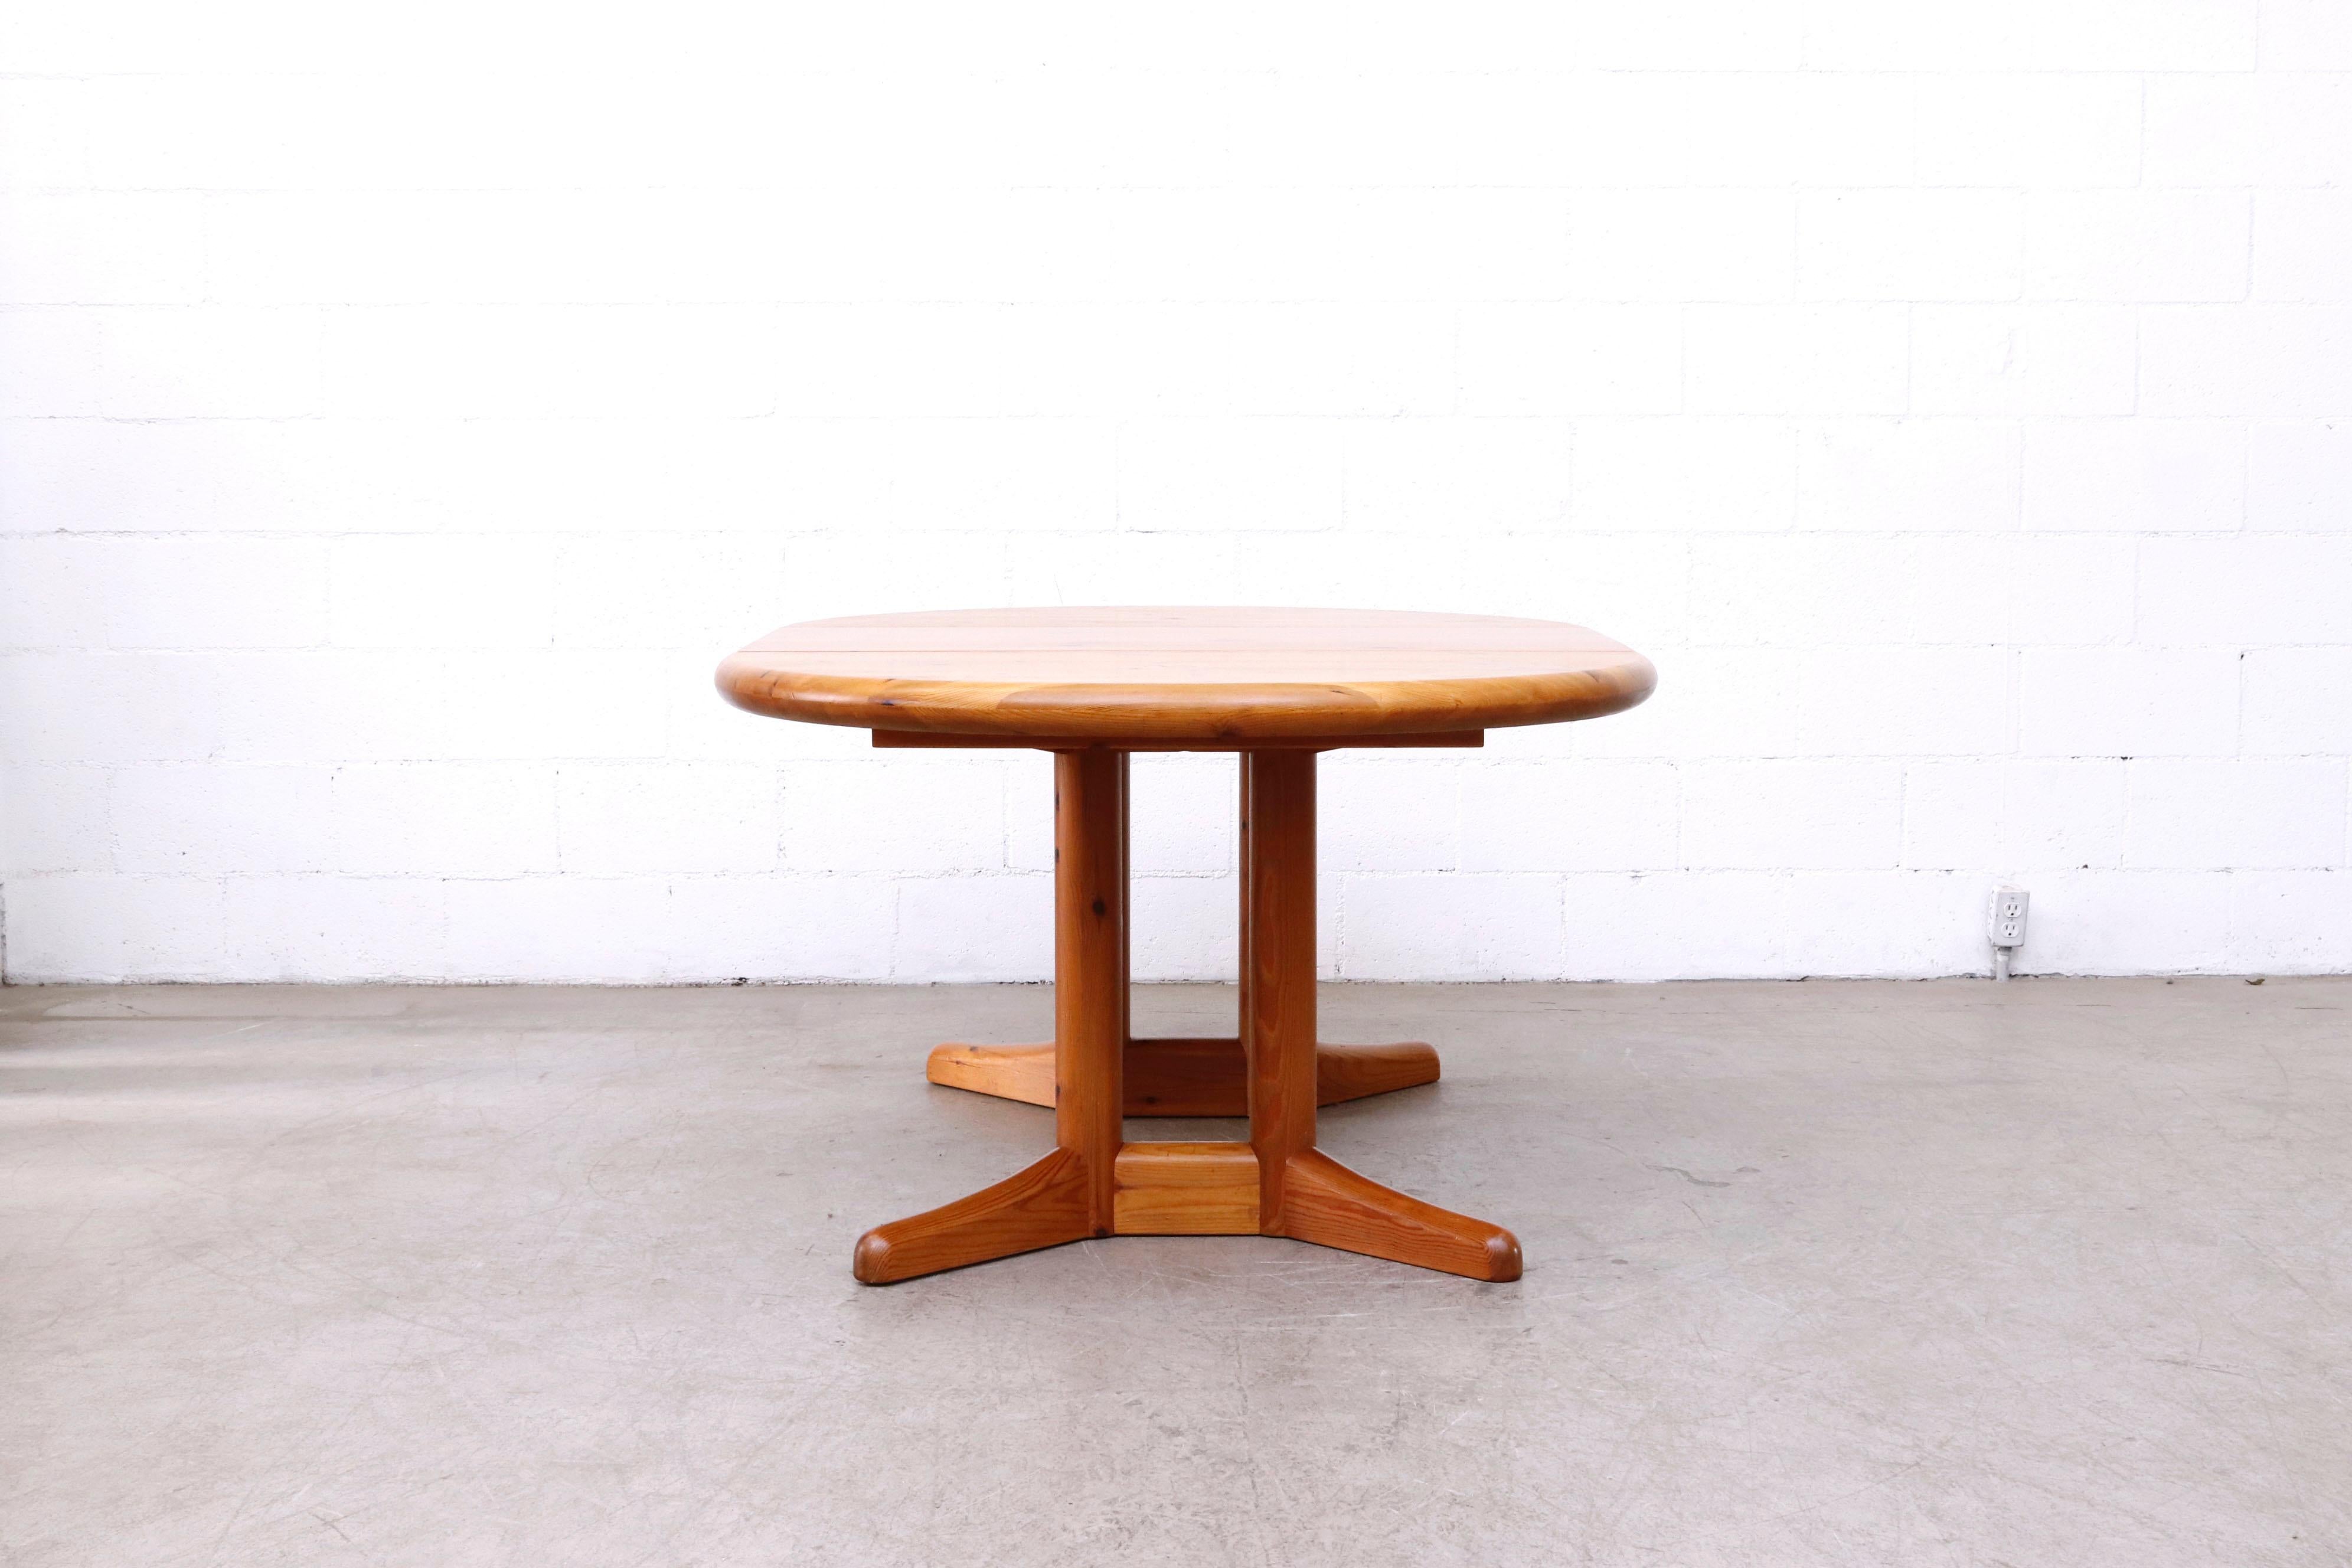 Rainer Daumiller style round-to-oval pine dining table with extension leaf. Extends to 67.25